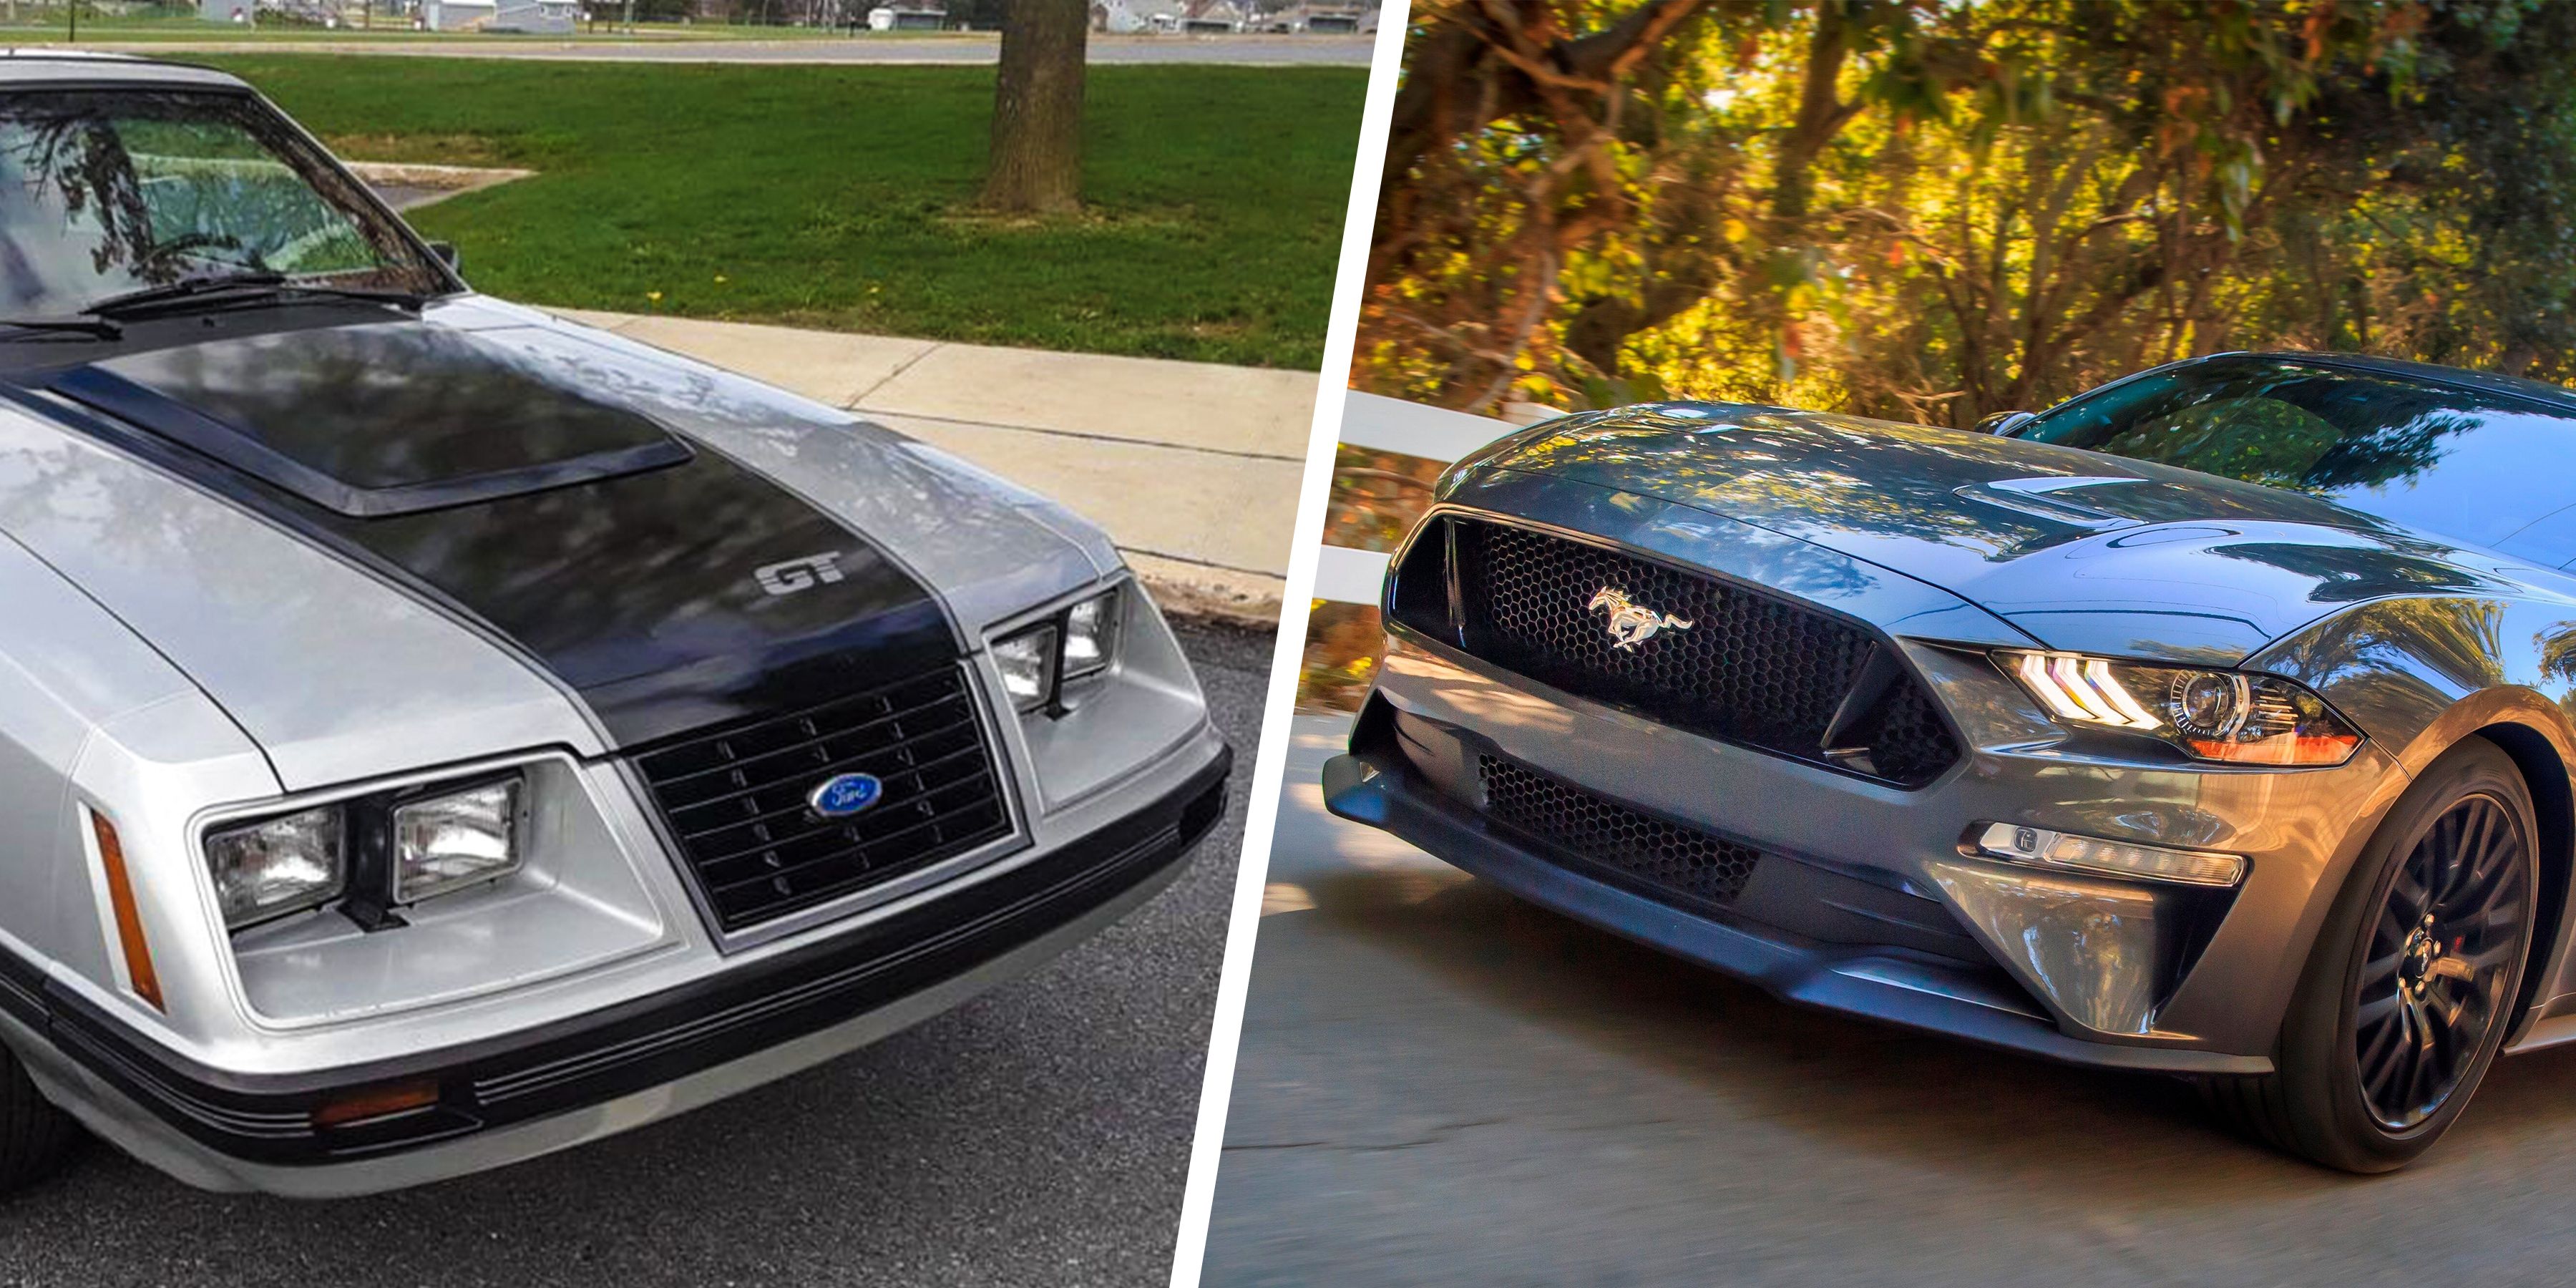 10 Vintage Cars Vs Their Modern Counterparts Which Would You Choose